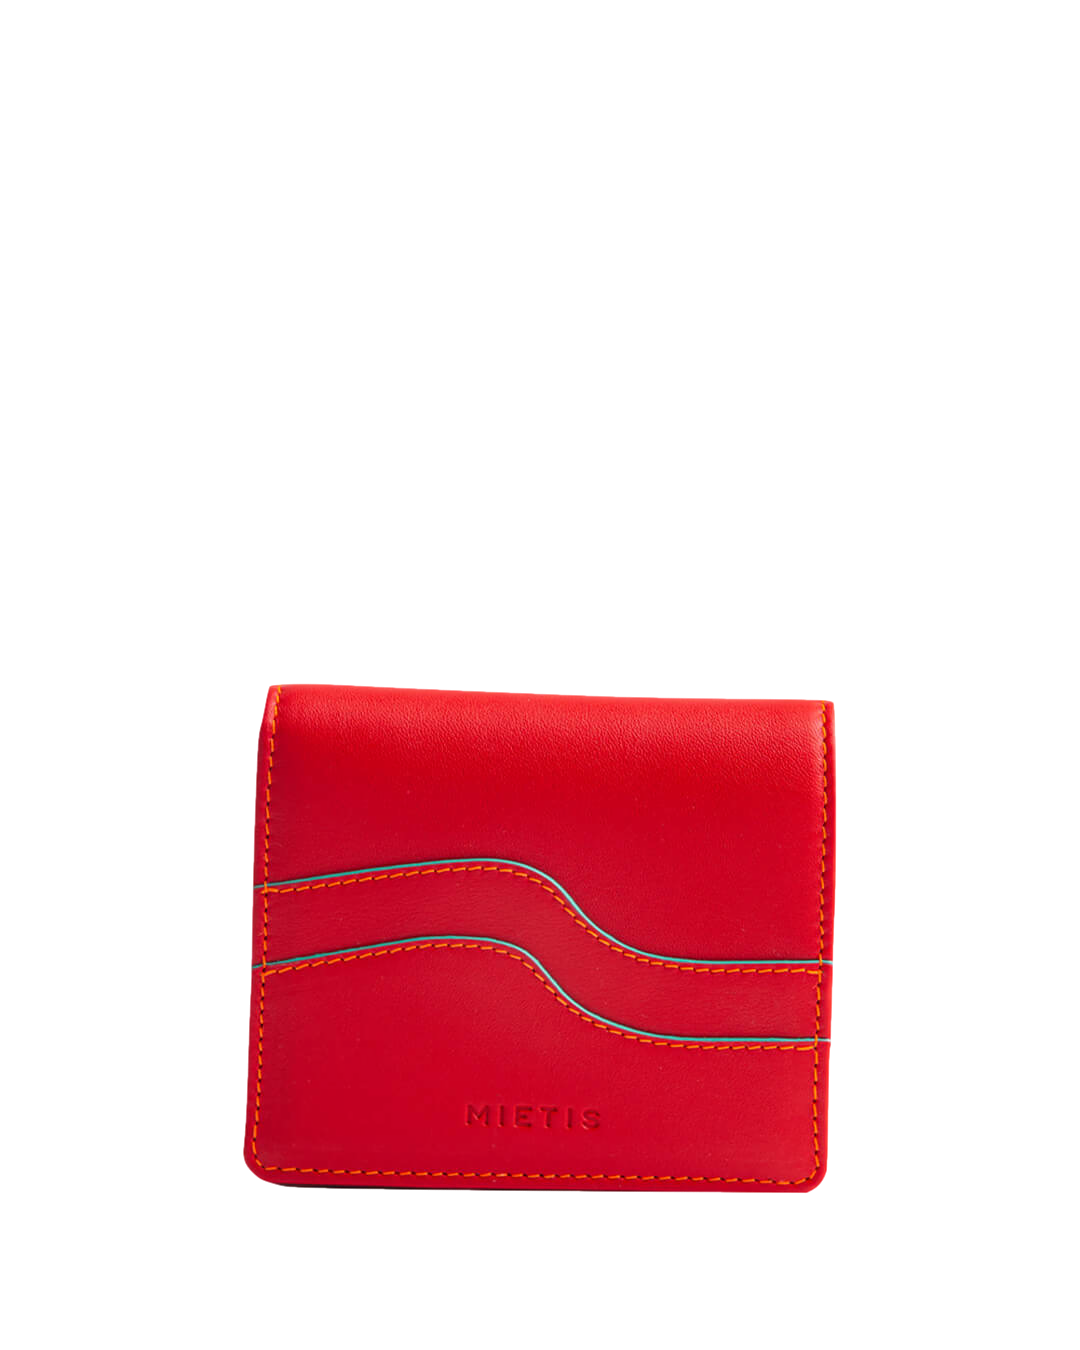 Mietis Waves Wallet Red